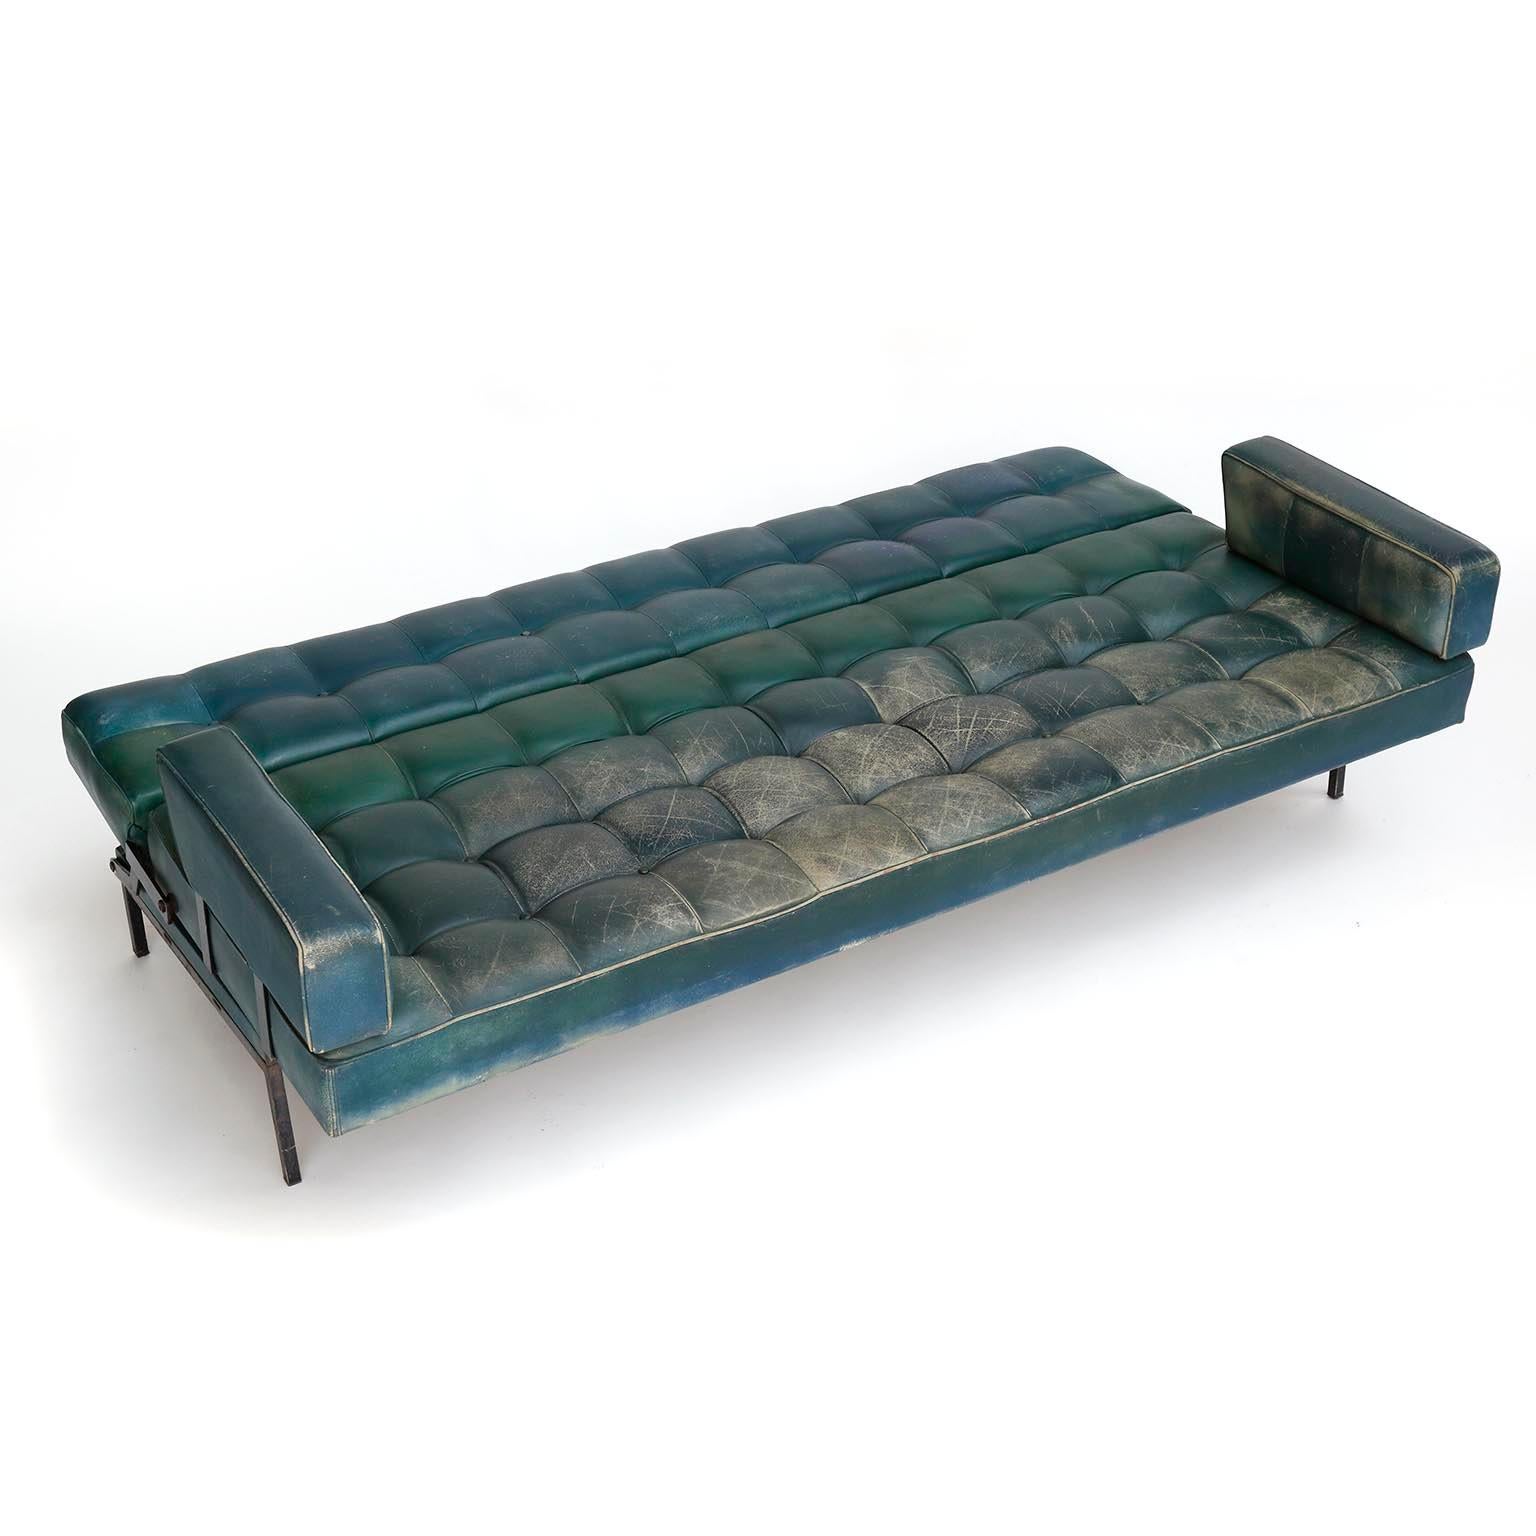 Johannes Spalt 'Constanze' Sofa Daybed Armrests, Patinated Green Leather, 1960s 1